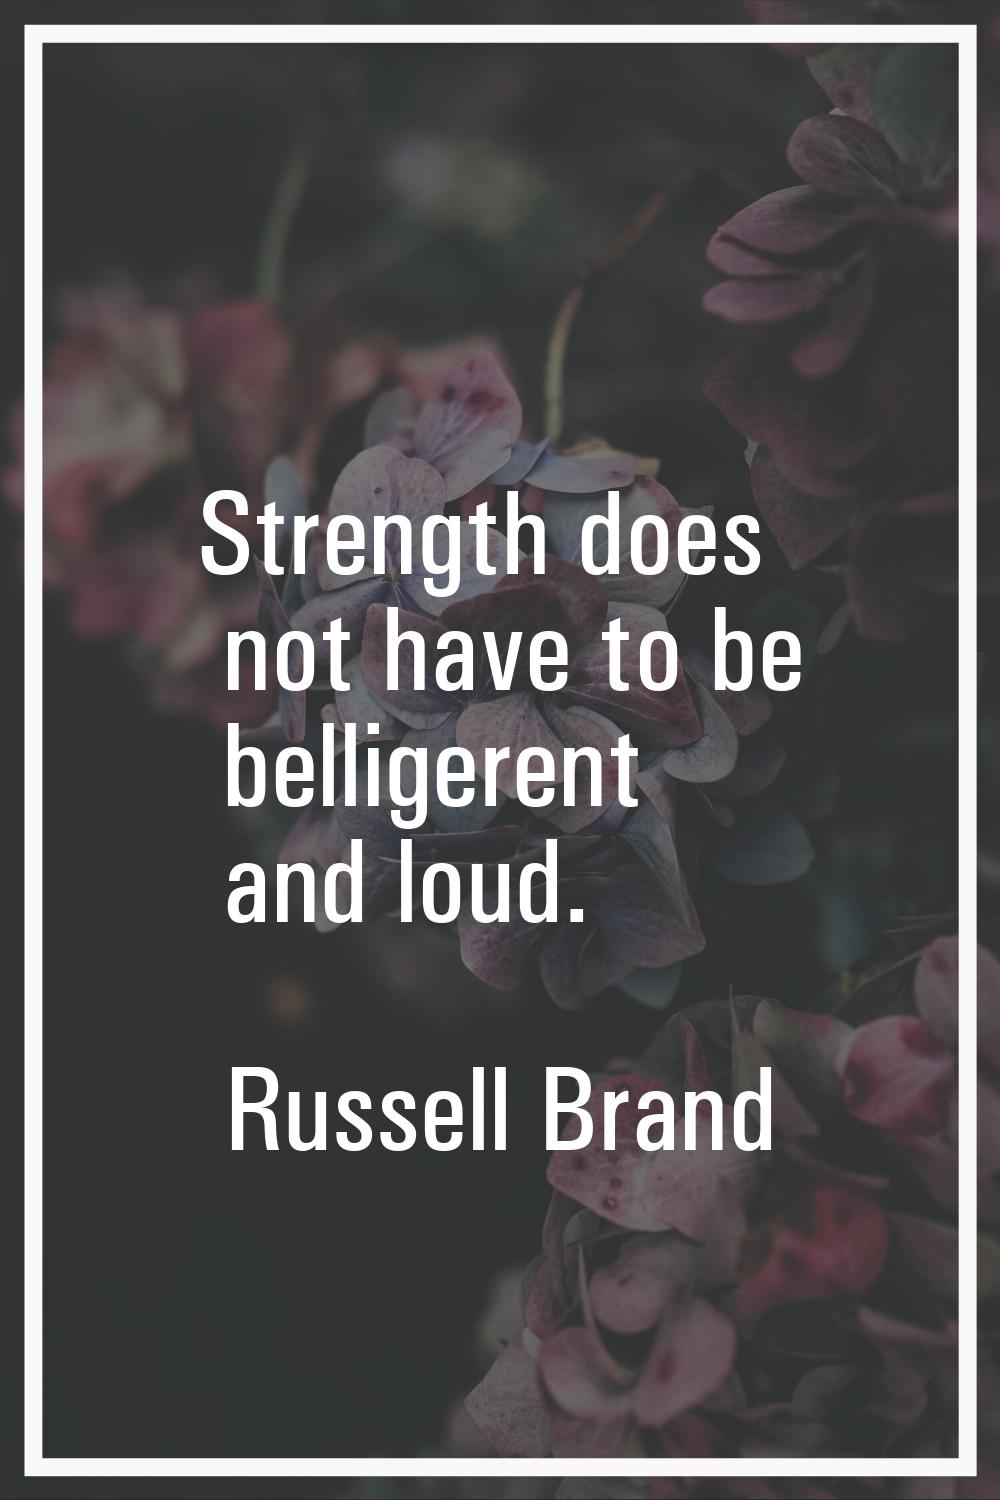 Strength does not have to be belligerent and loud.